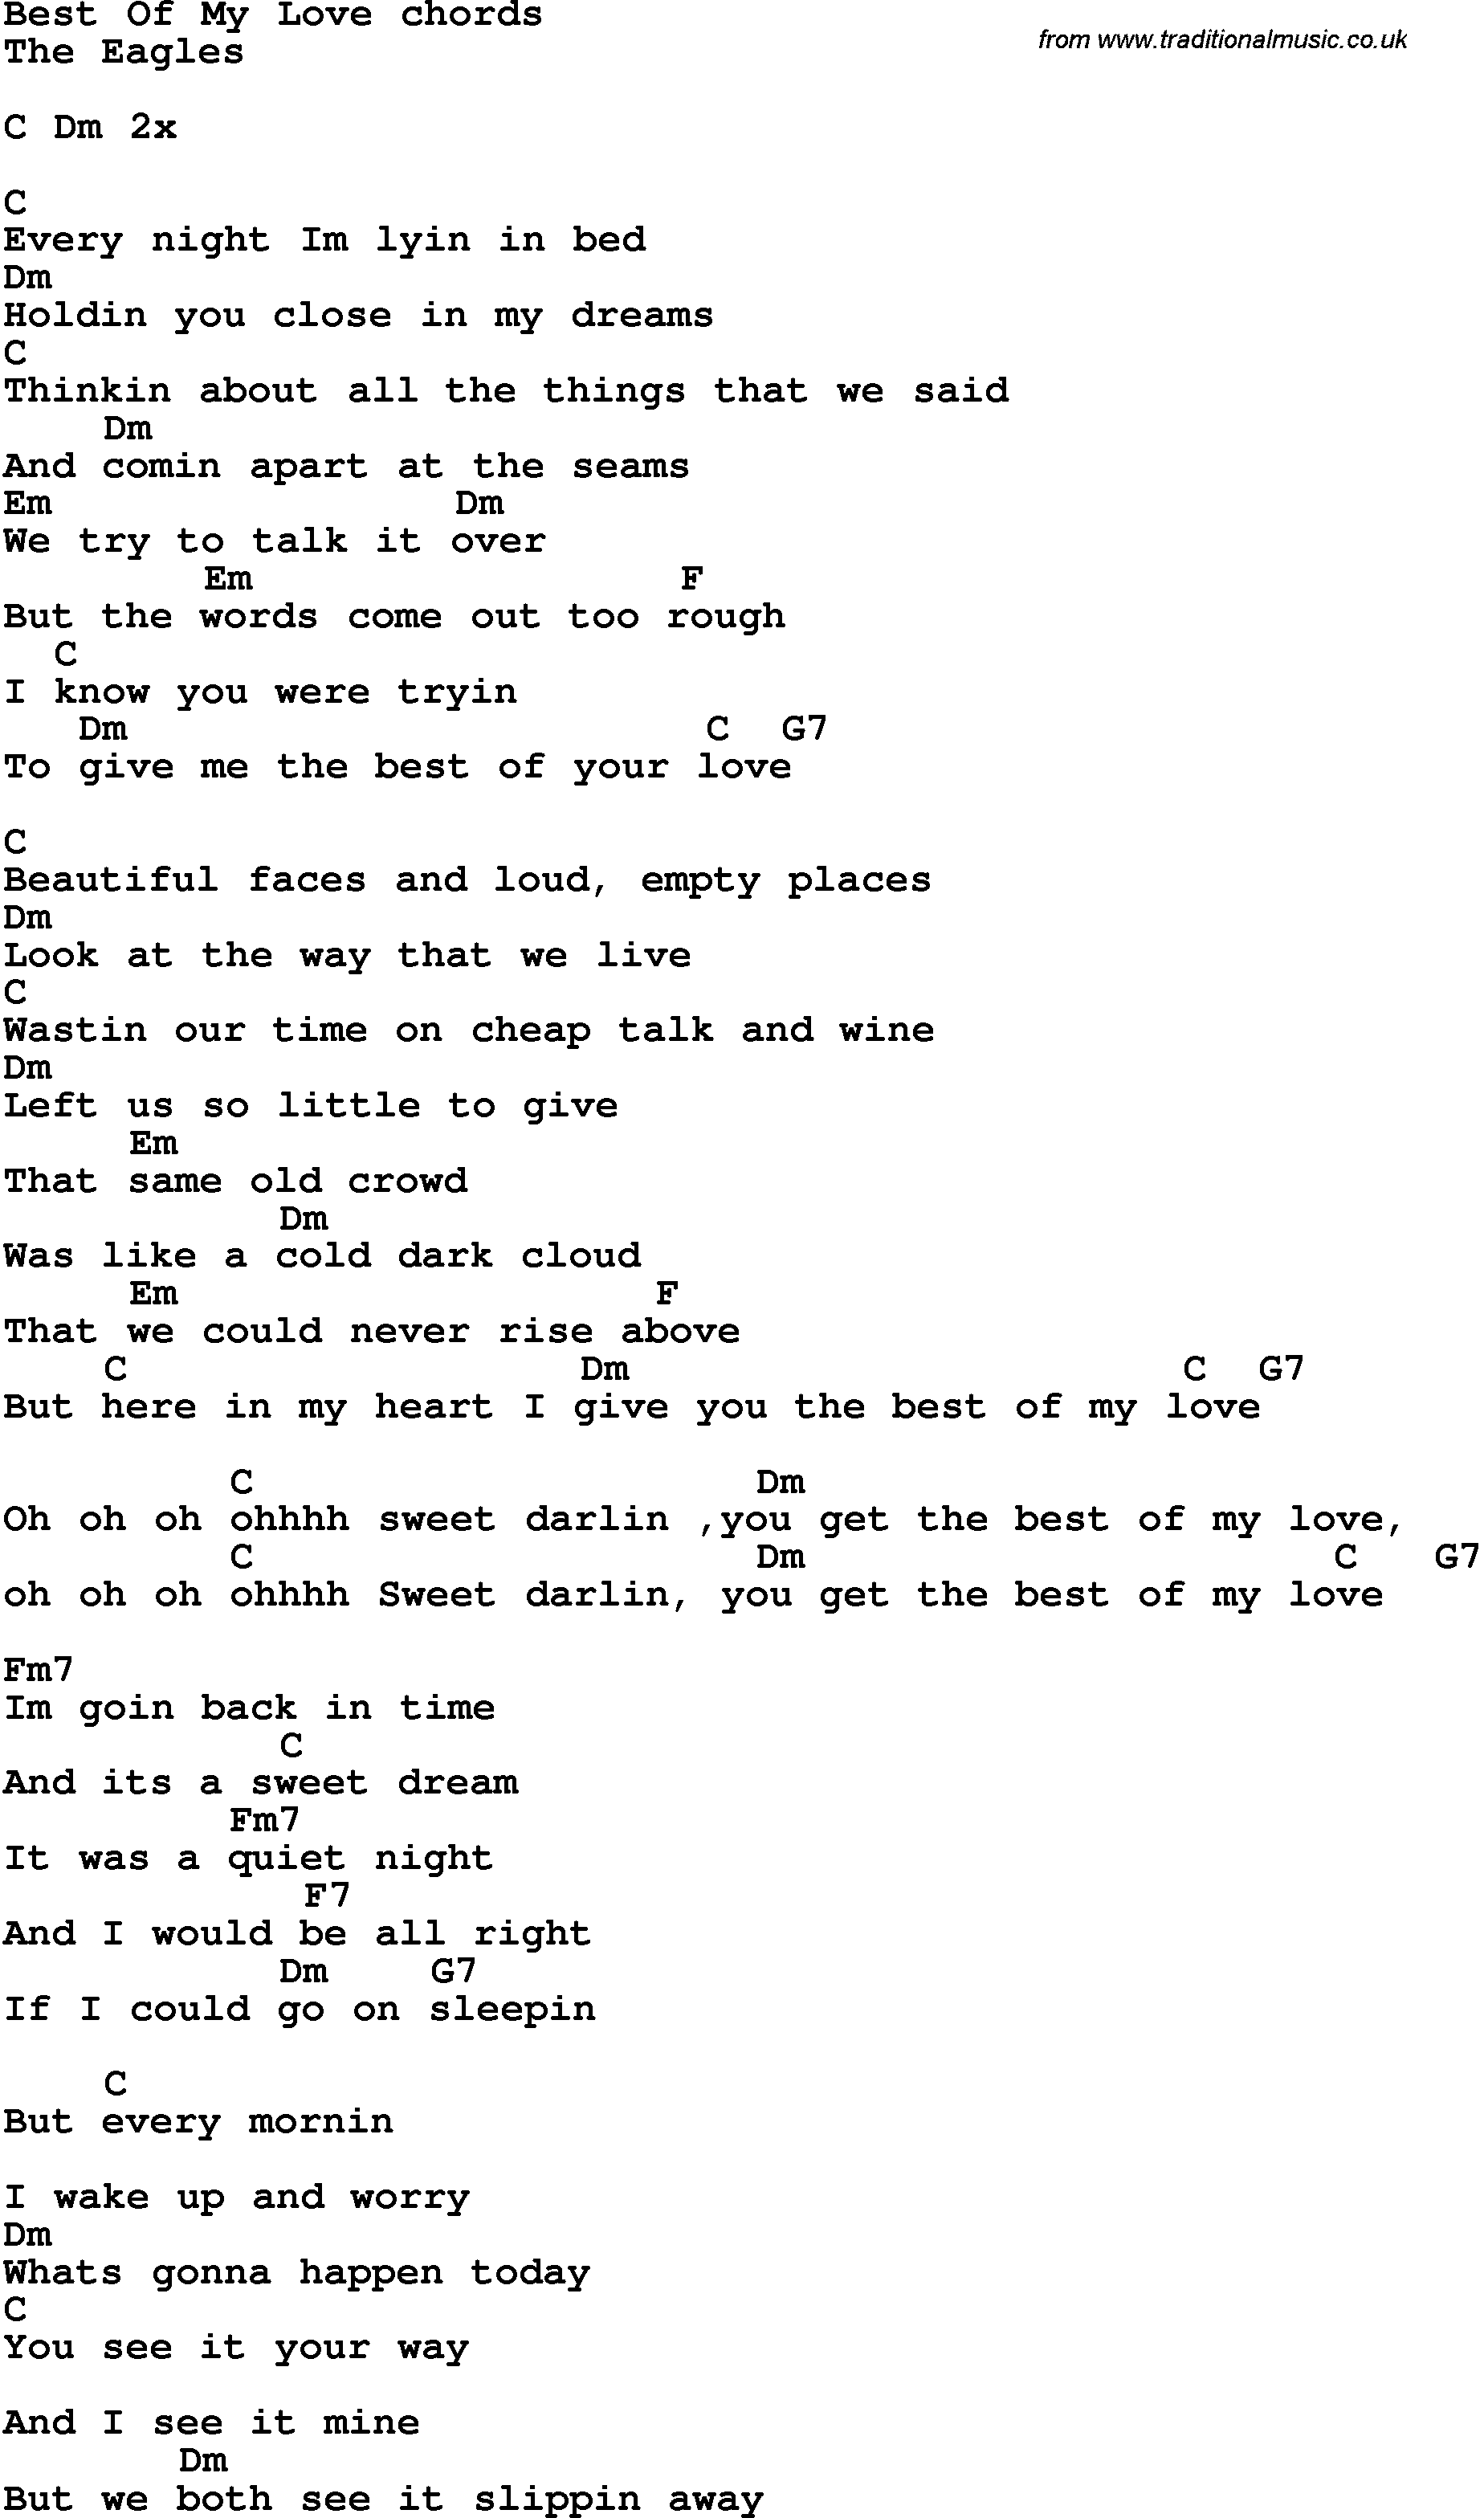 Song Lyrics with guitar chords for Best Of My Love